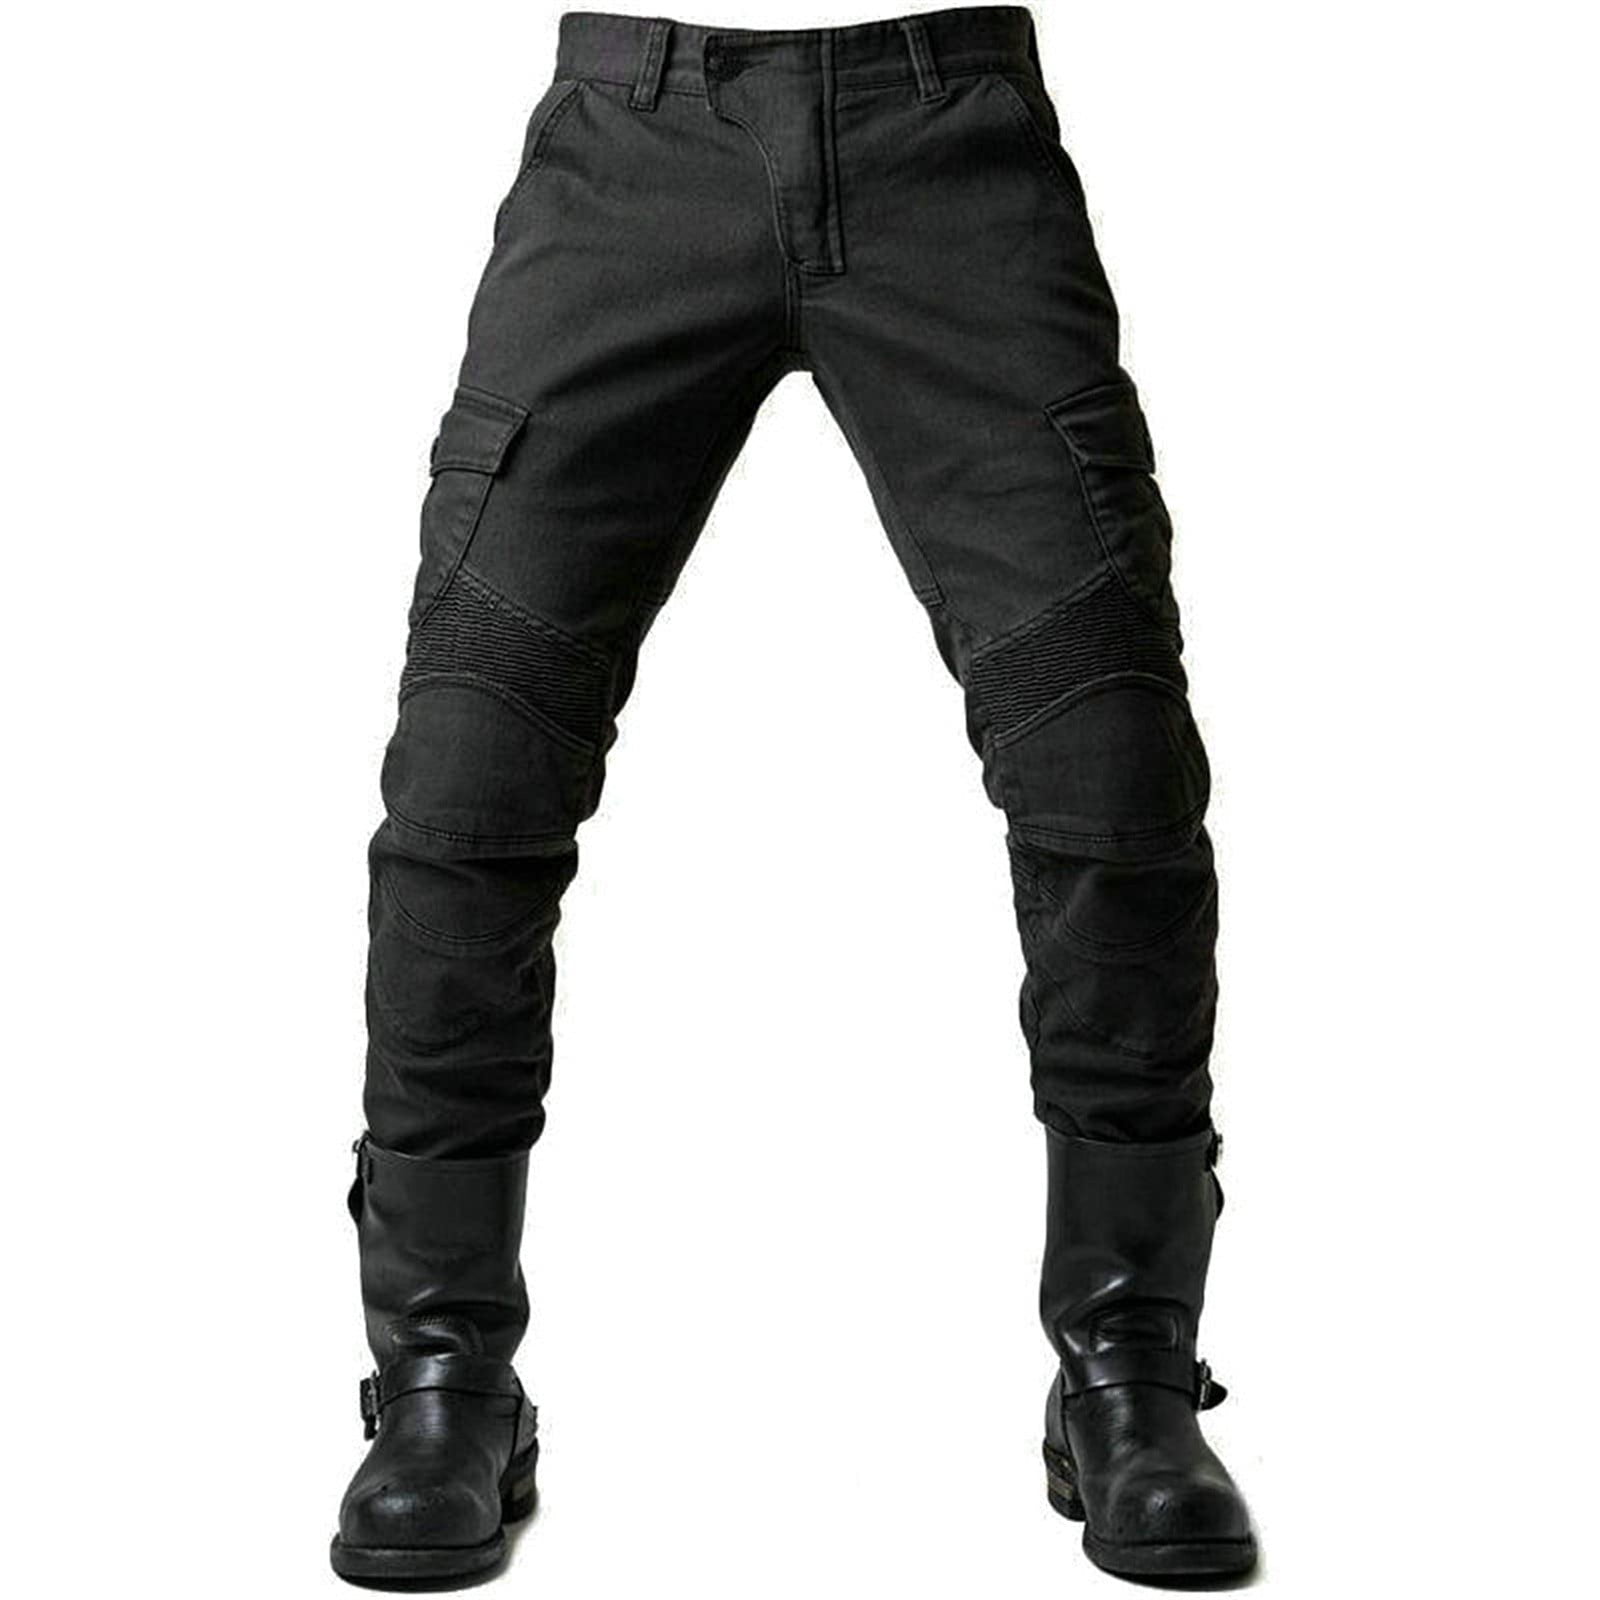 Umitay Motorcycle Protective Trousers Men's Motorcycle Jeans